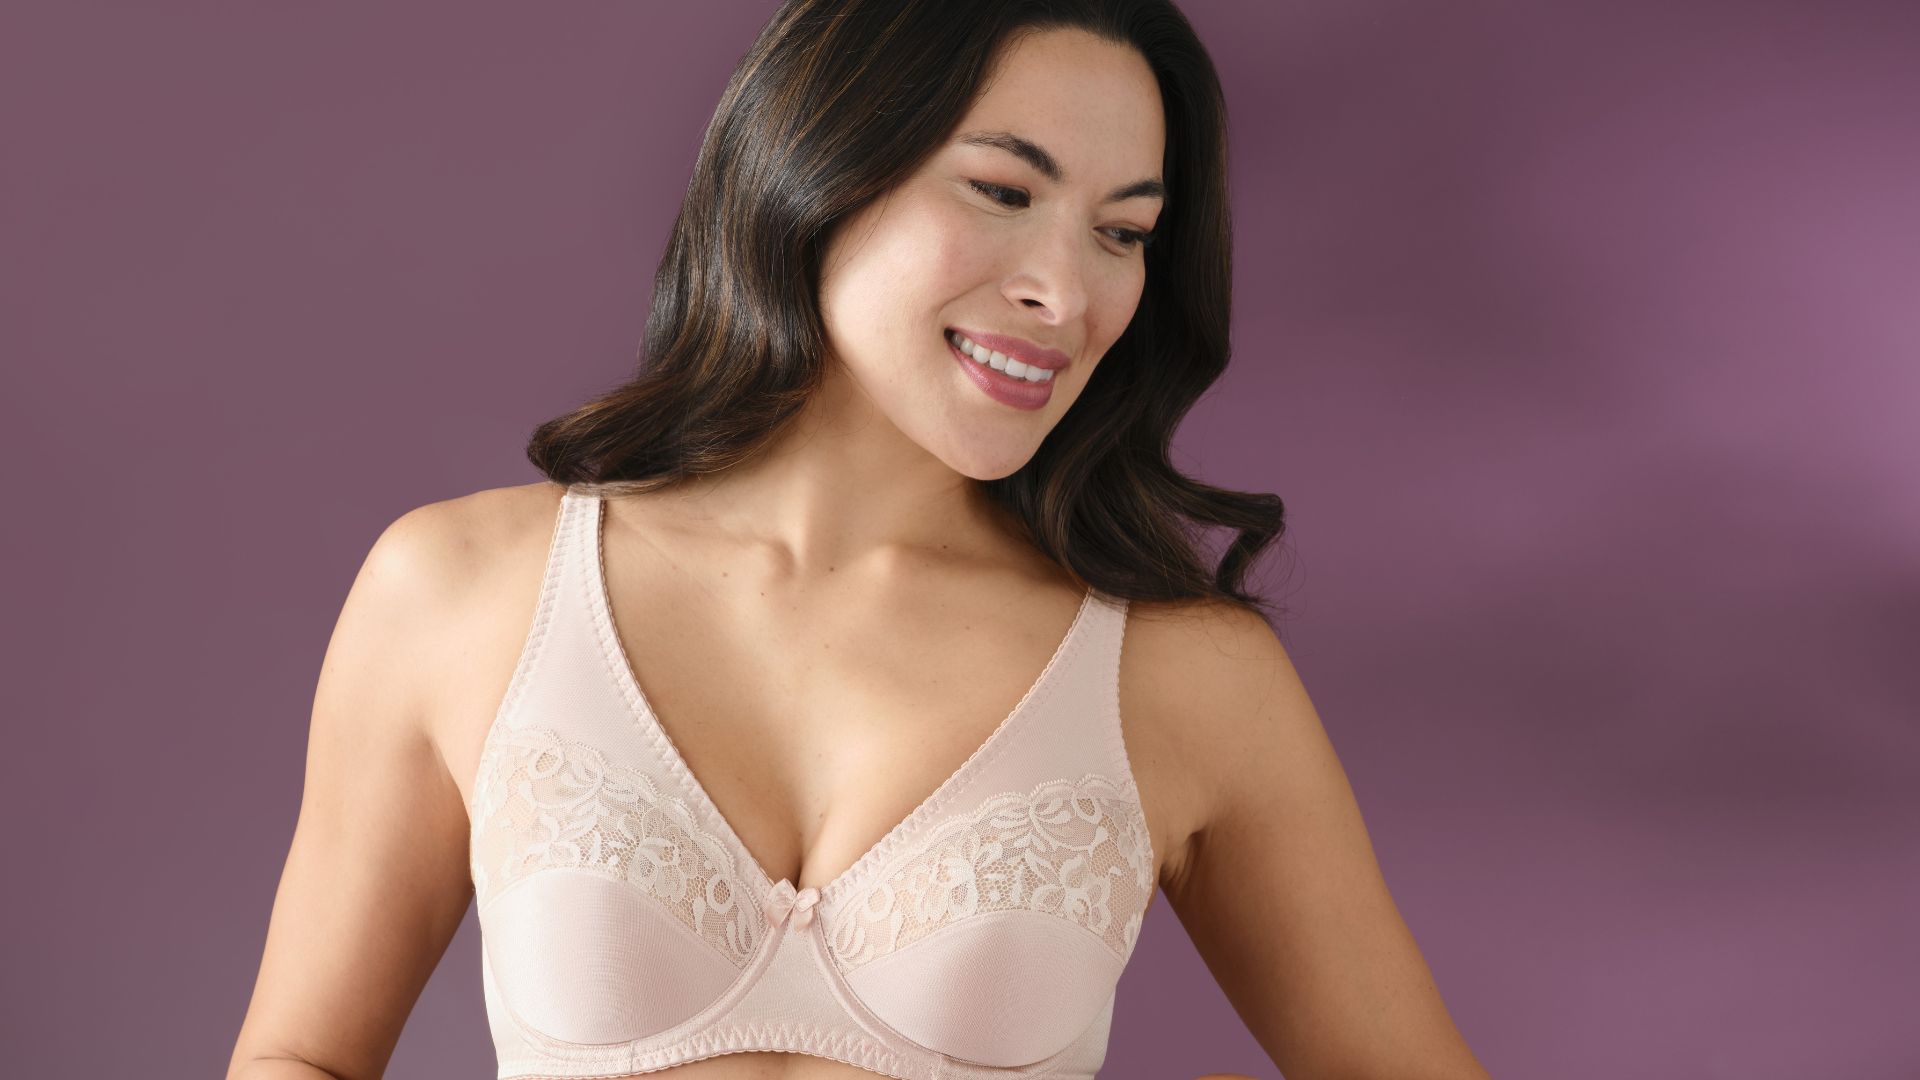 Bust Sizes and How to Measure Bra Size at Home